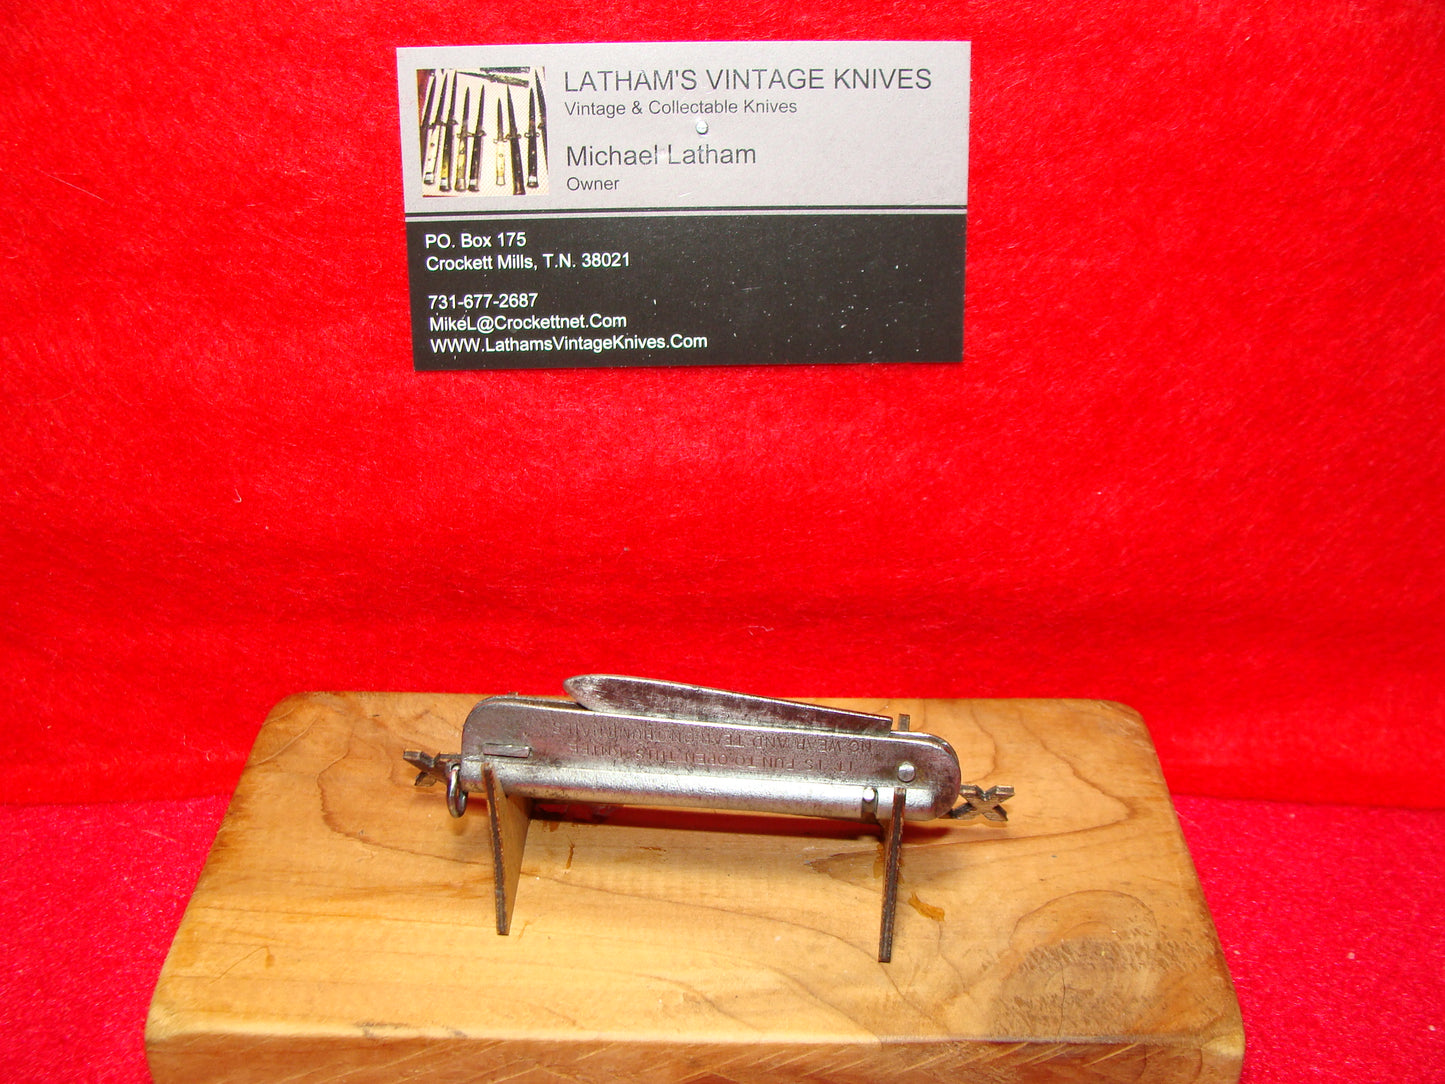 GEORGE MILLER NOVELTY PENKNIFE 1880-1889 BAIL RELEASE VINTAGE AMERICAN AUTOMATIC KNIFE ALL METAL